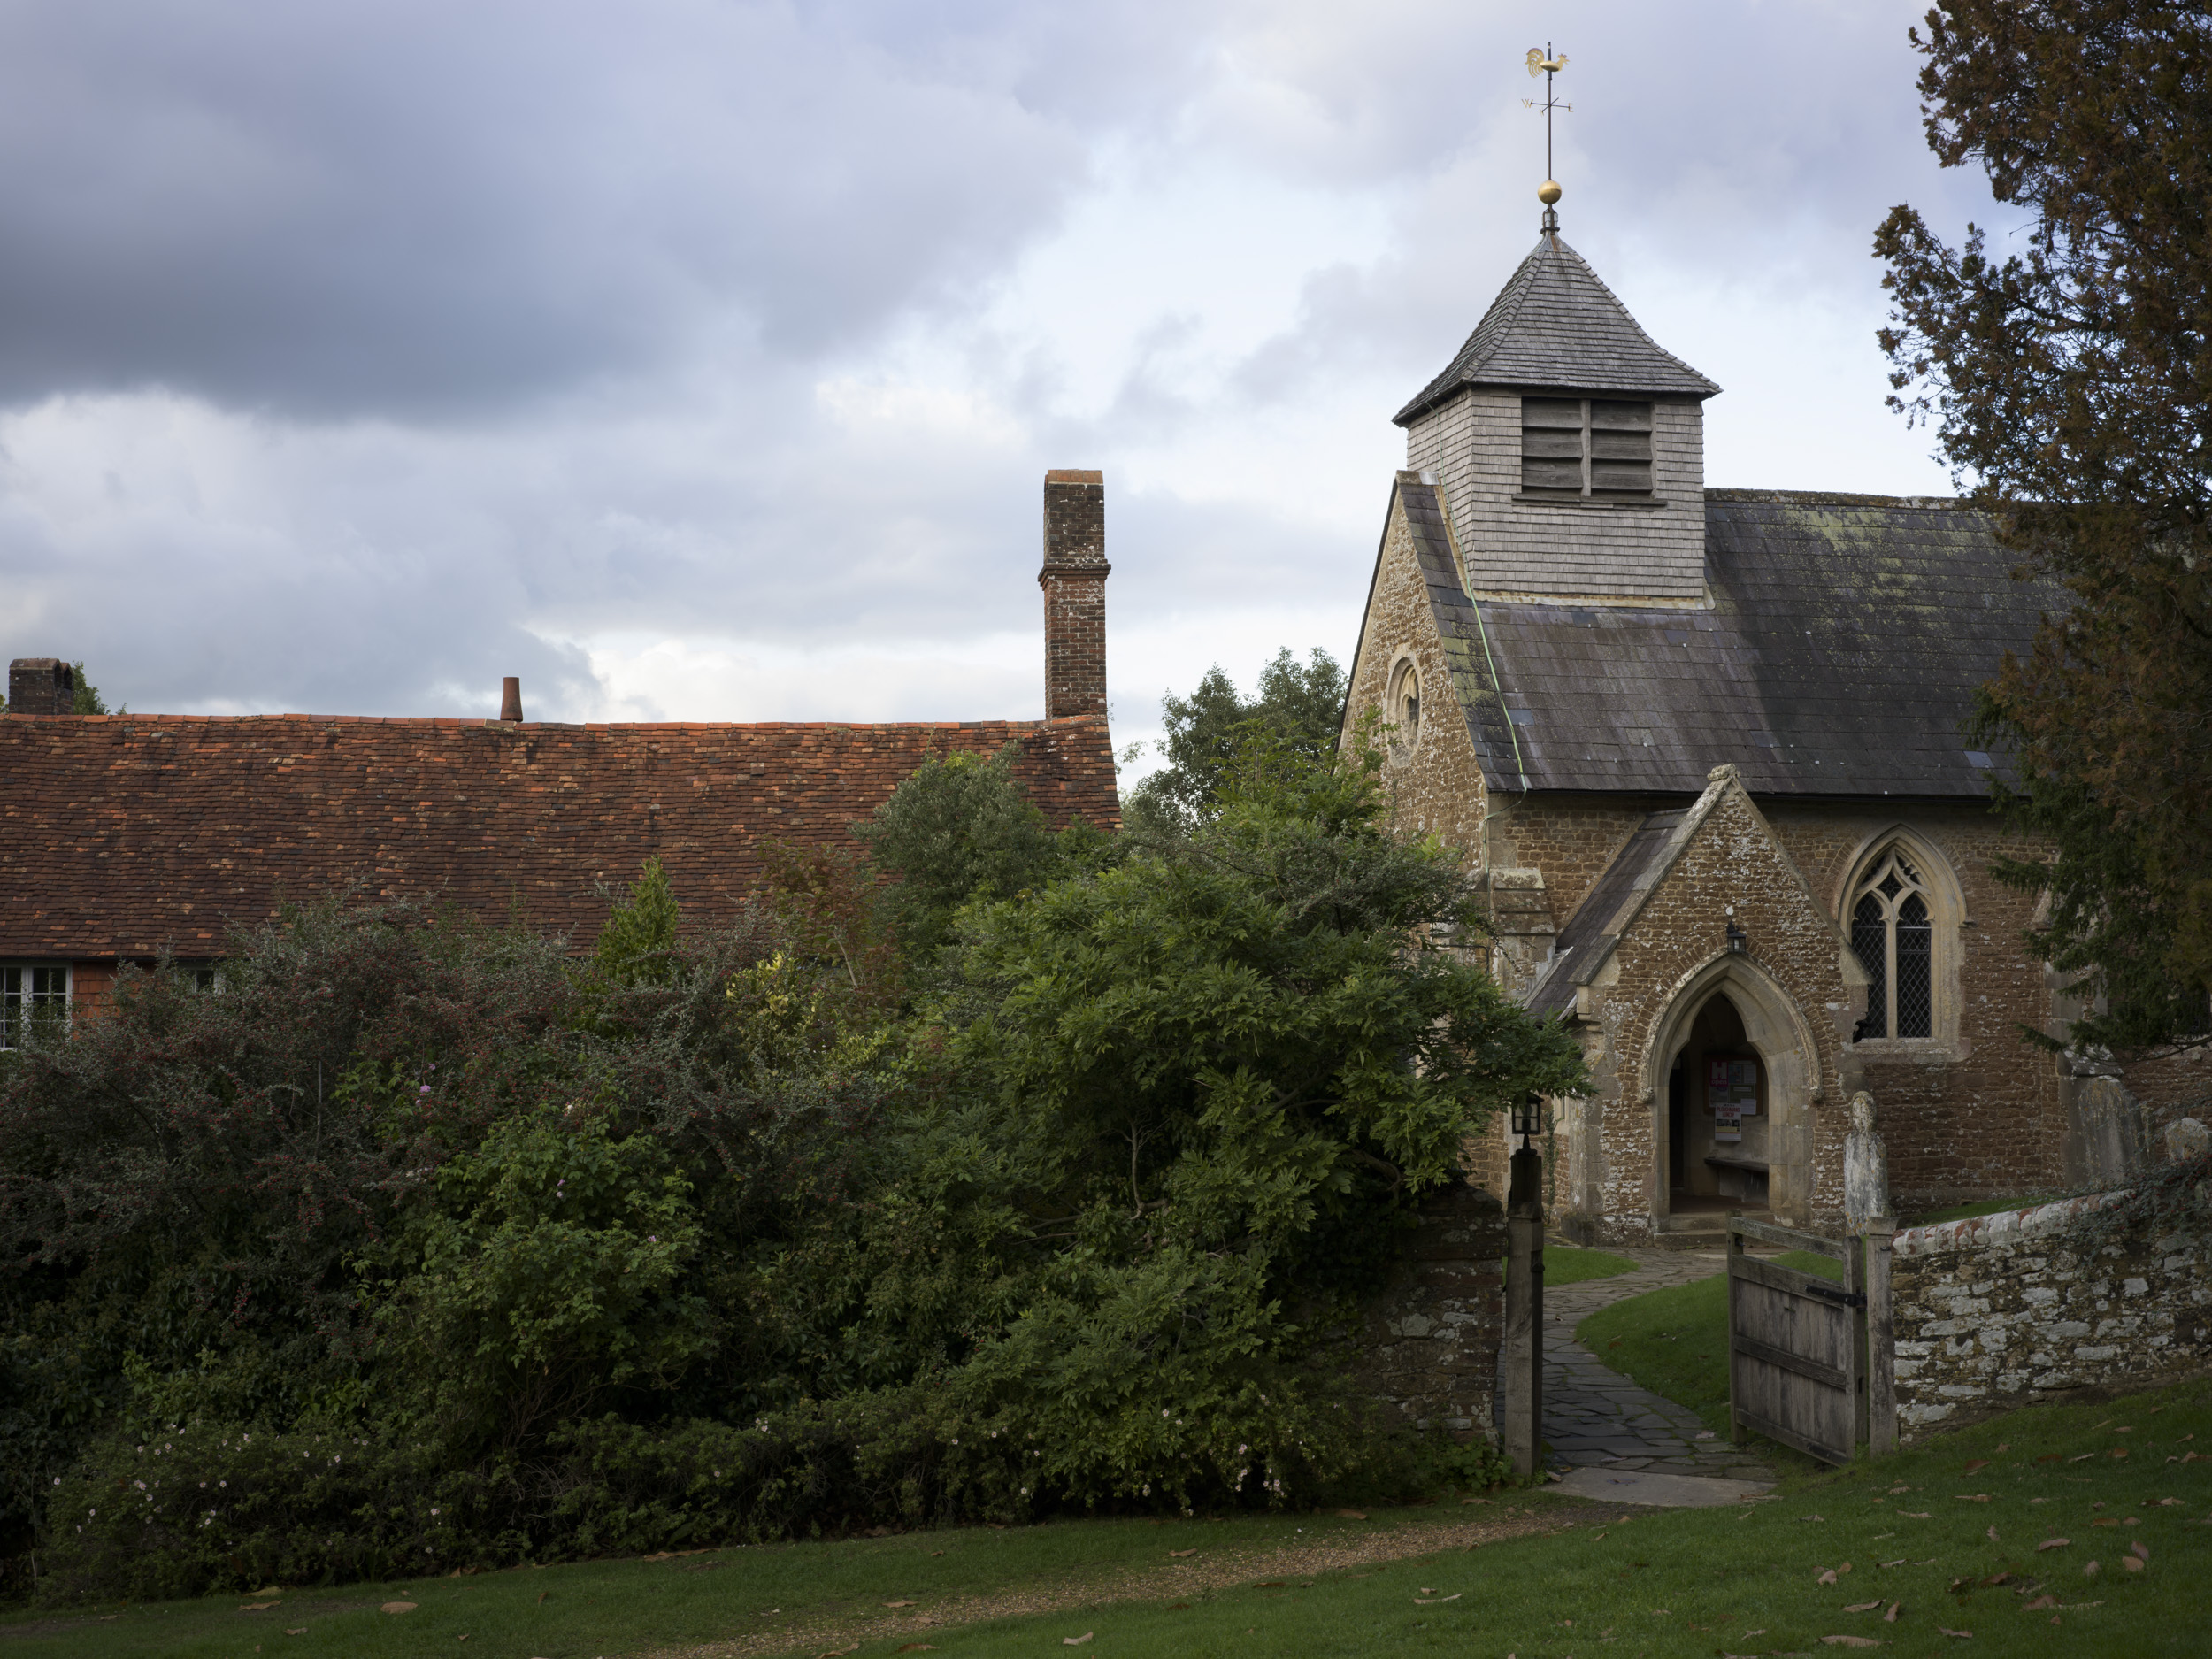 Sample image taken with the Hasselblad X2D 100C of a church on a cloudy day